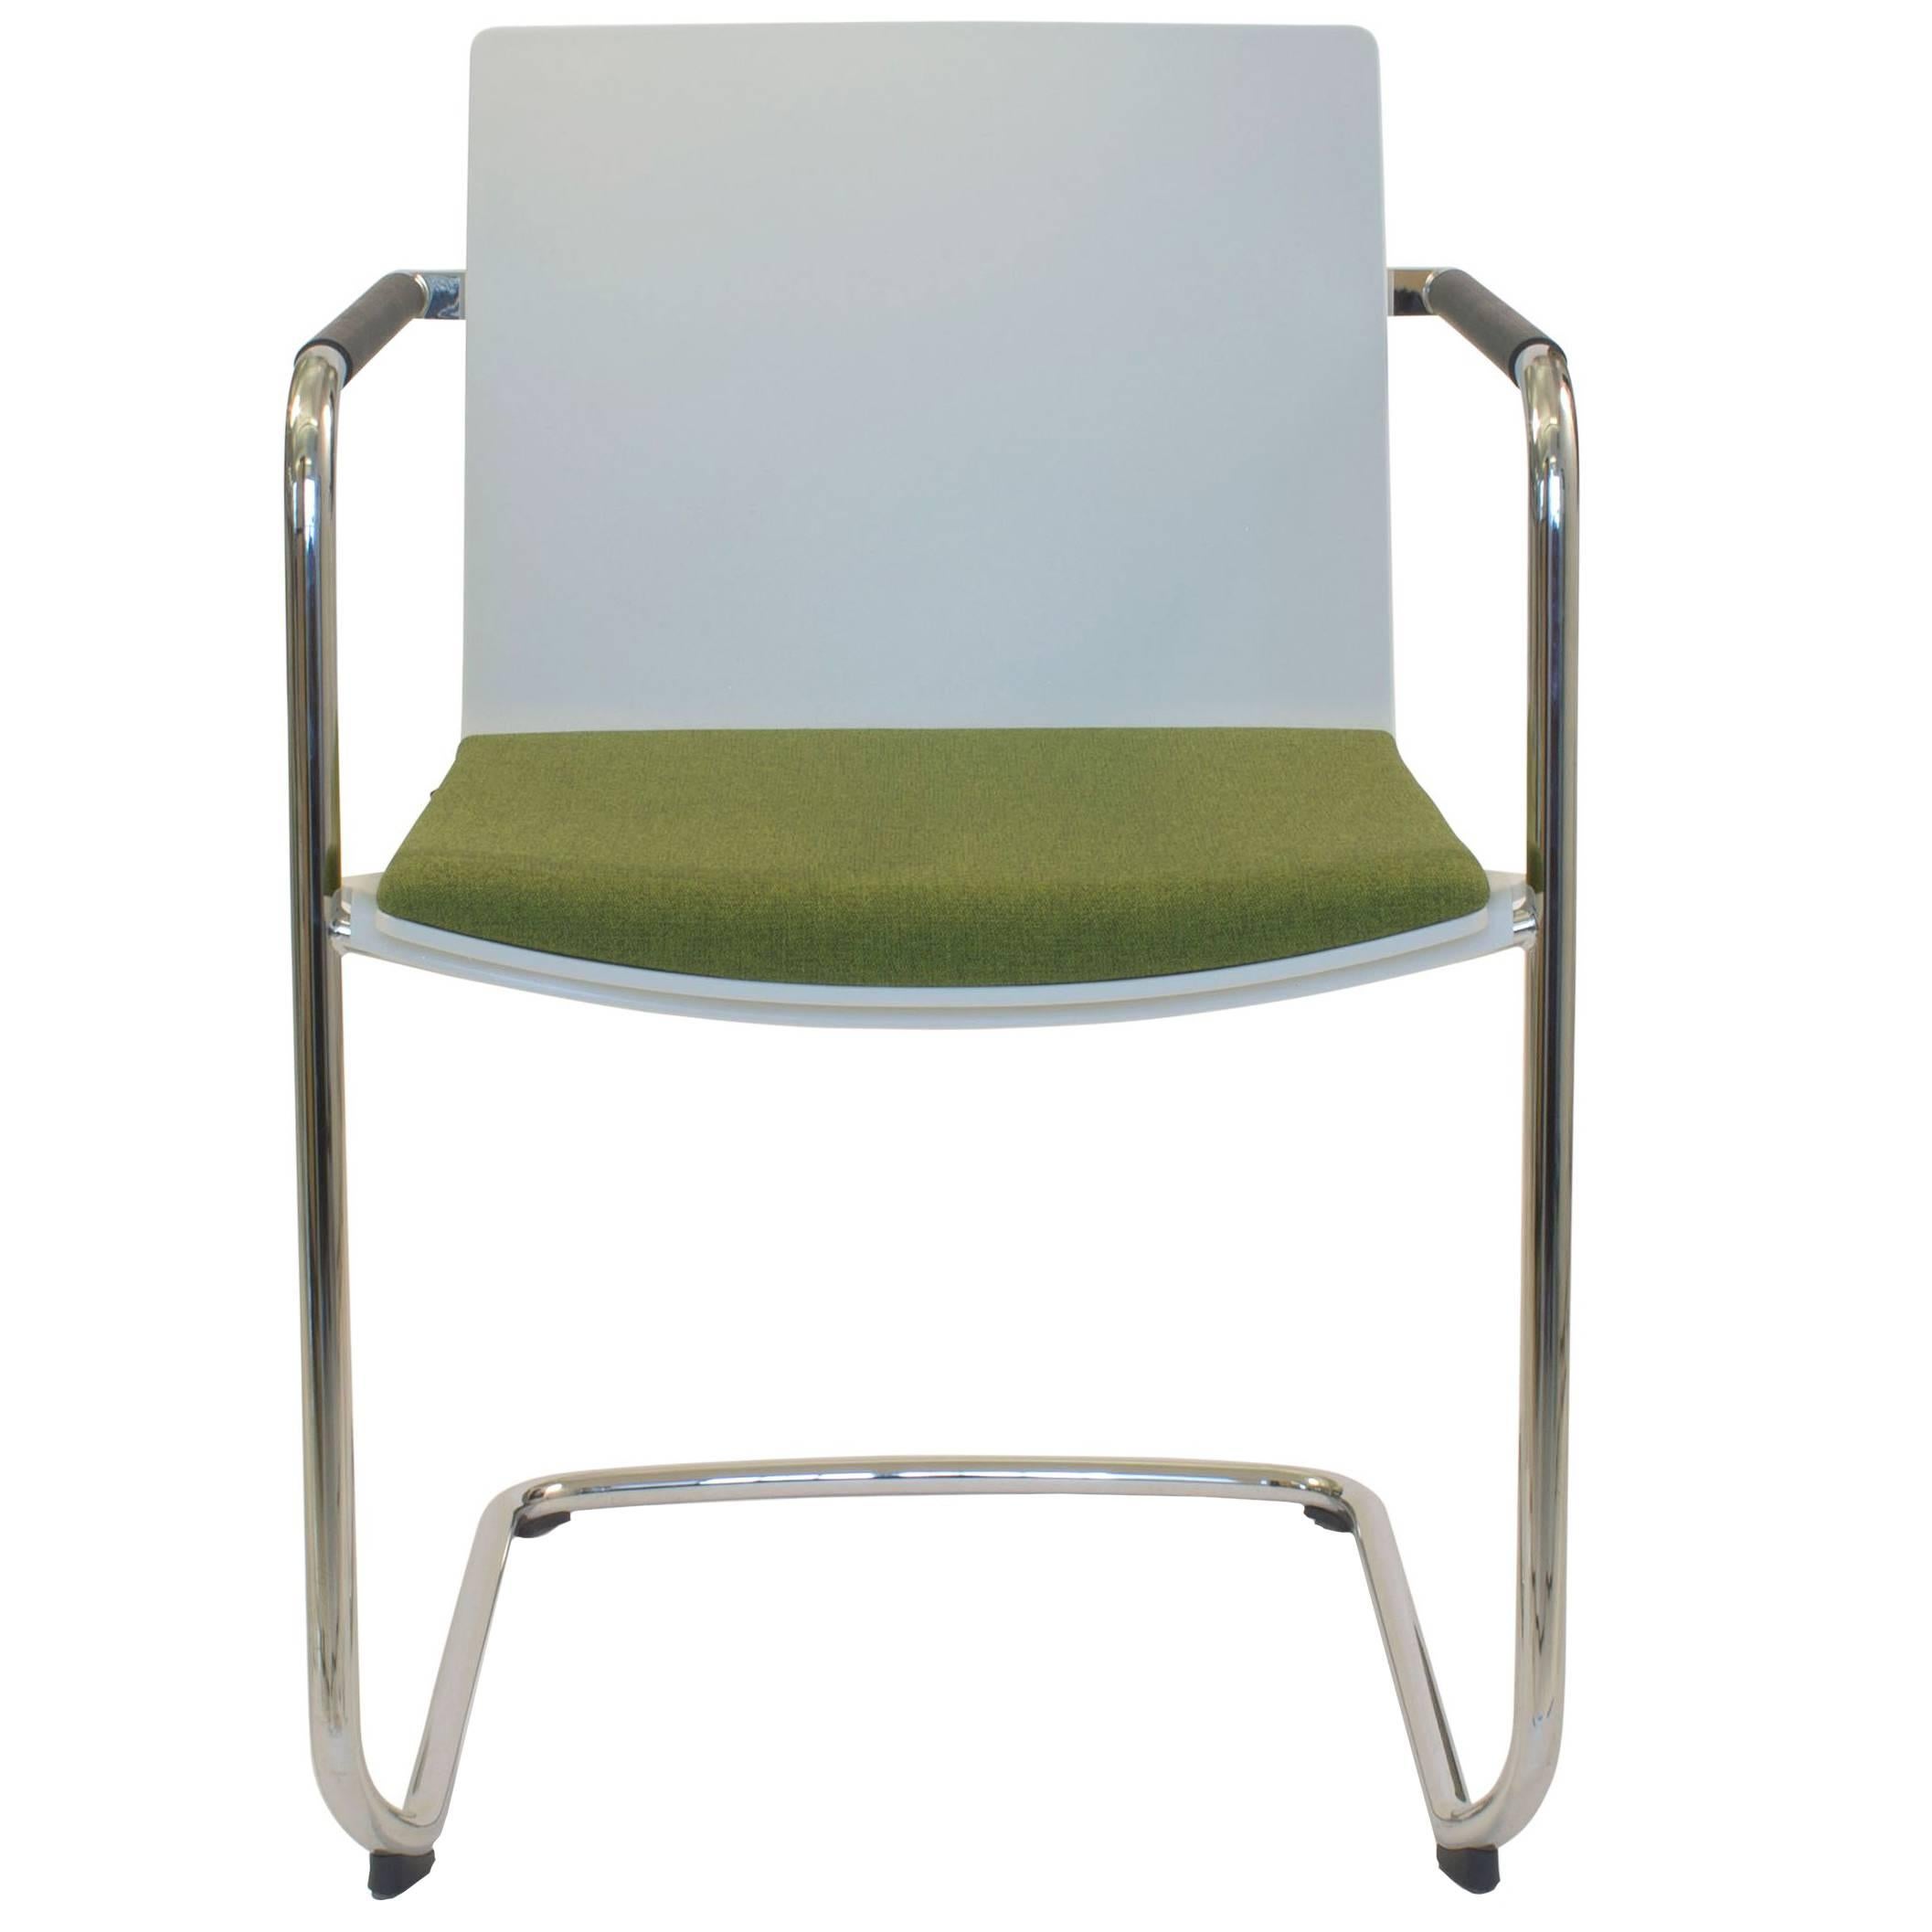 Green and White Neos 183/3 Cantilever Chair by Wiege for Wilkhahn, Germany For Sale